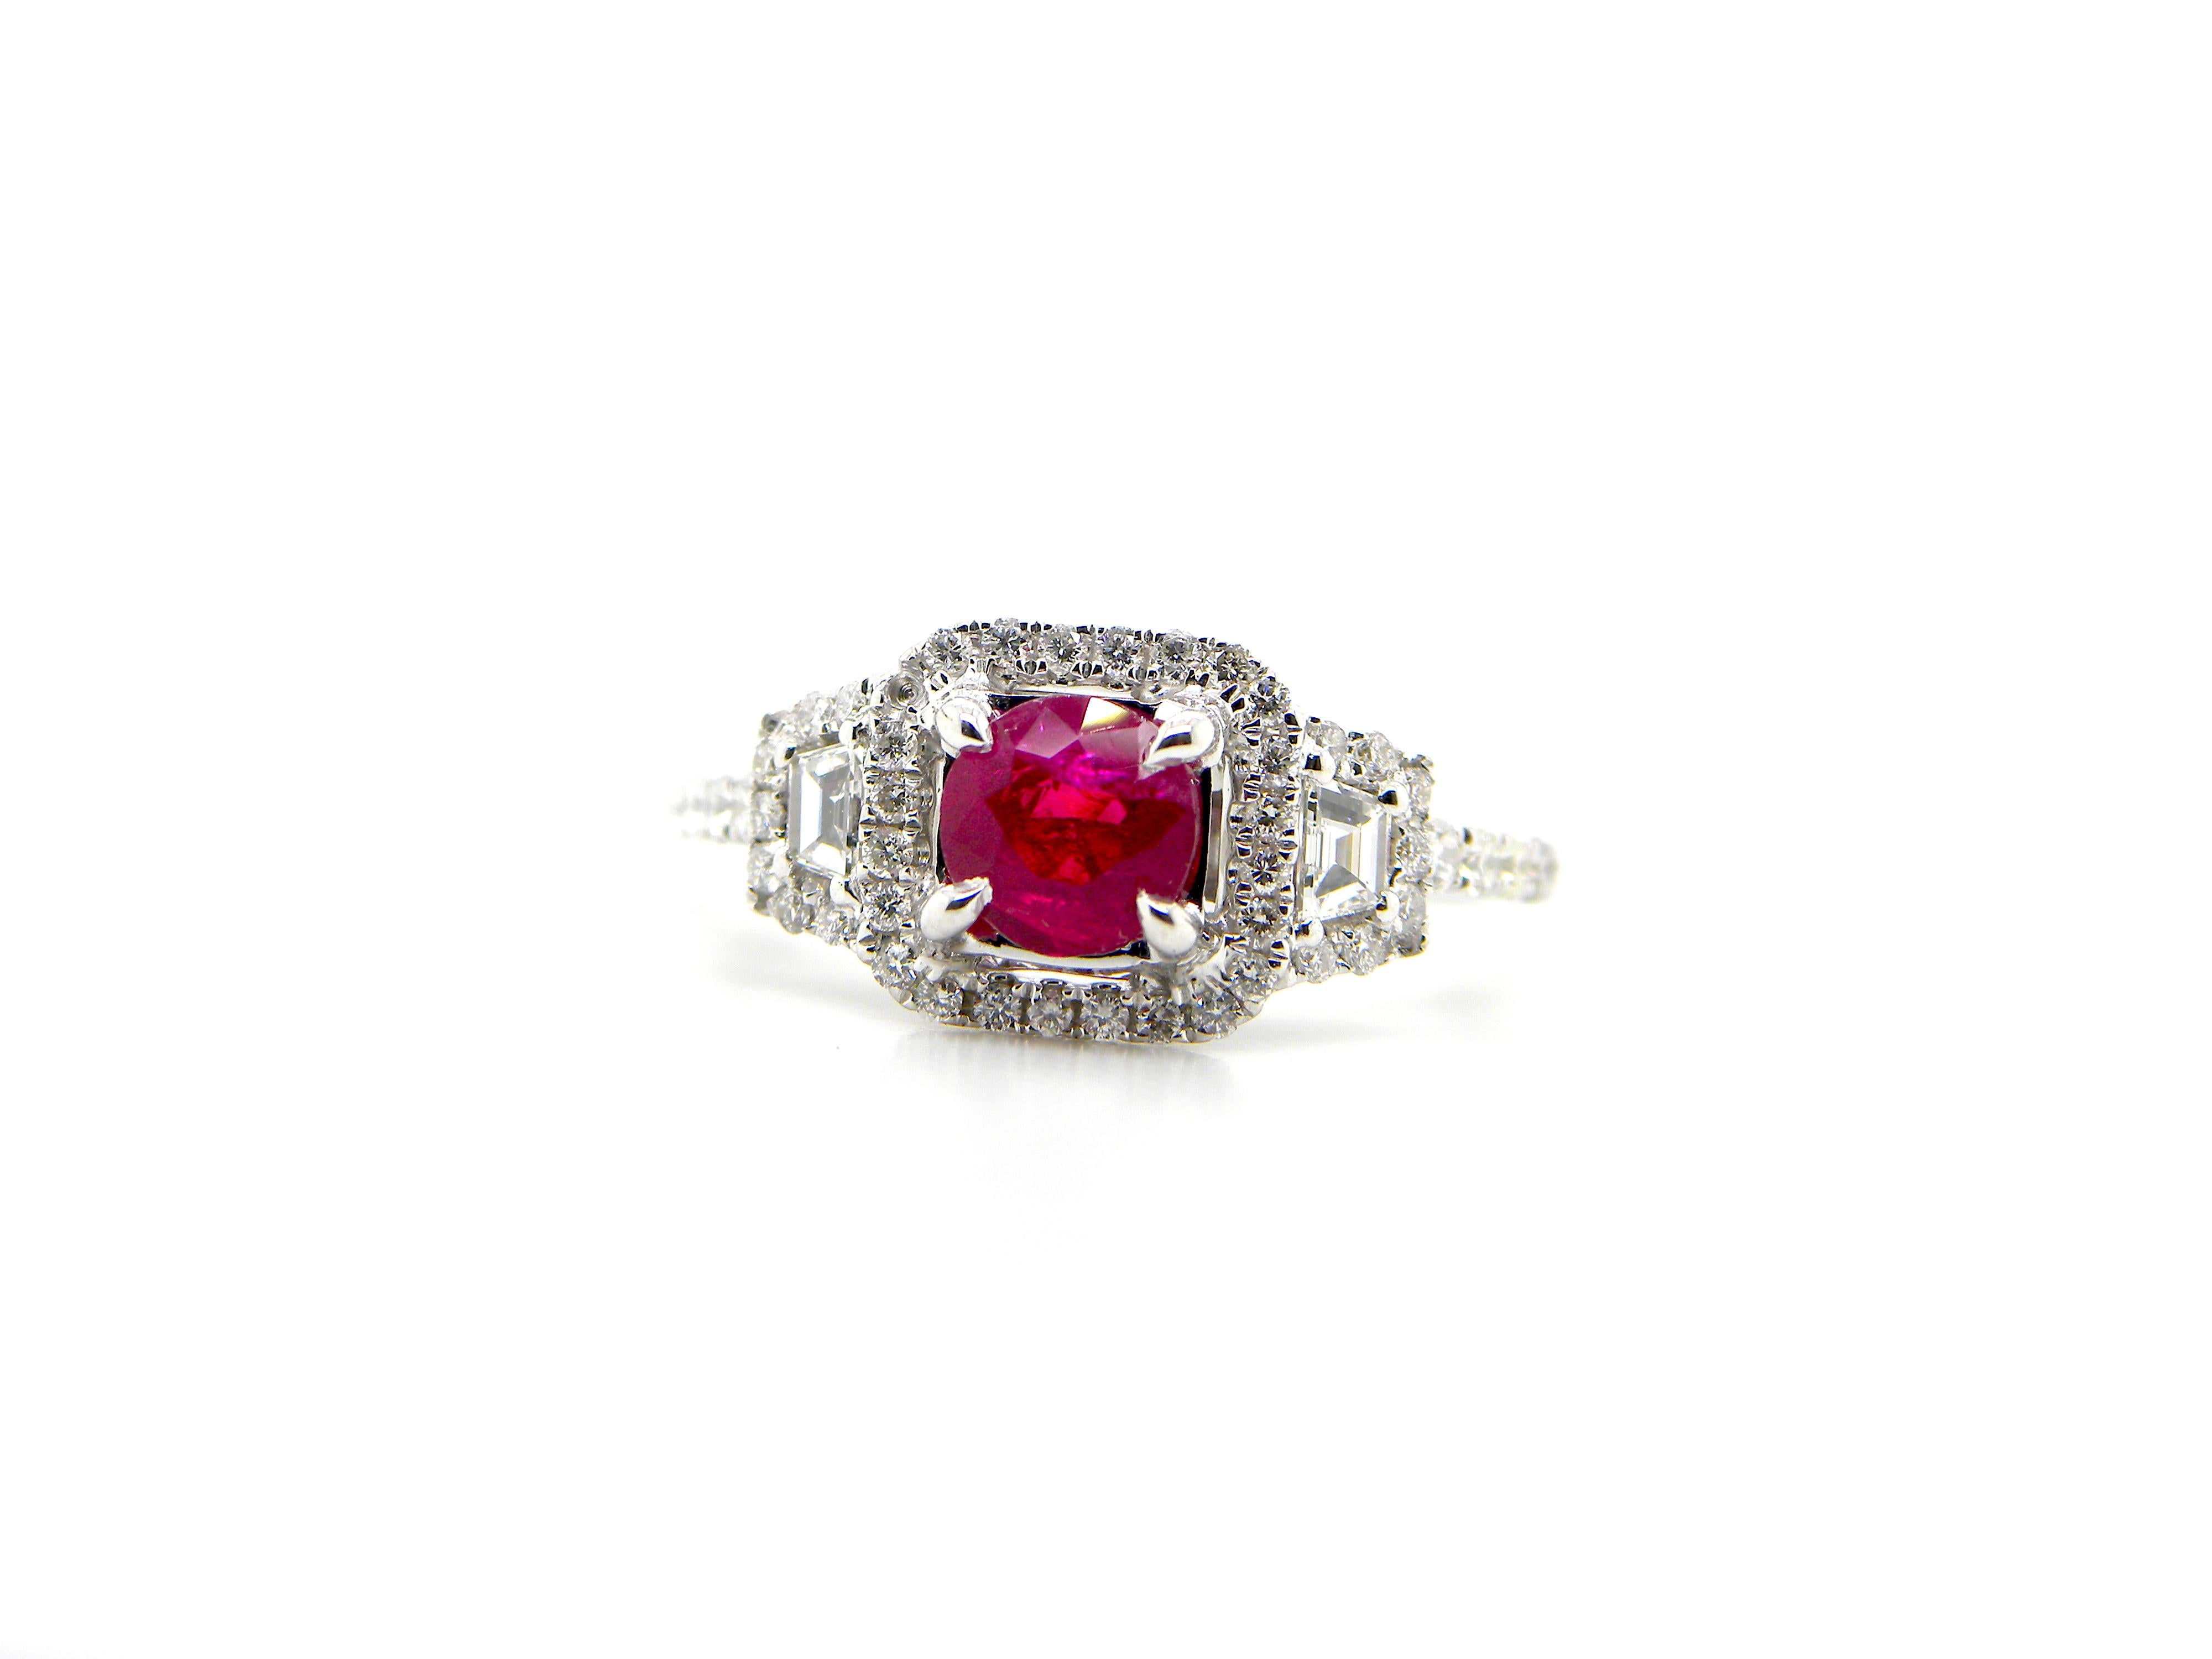 Round Cut 1.12 Carat GIA Certified Unheated Vivid Red Burmese Ruby and Diamond Gold Ring